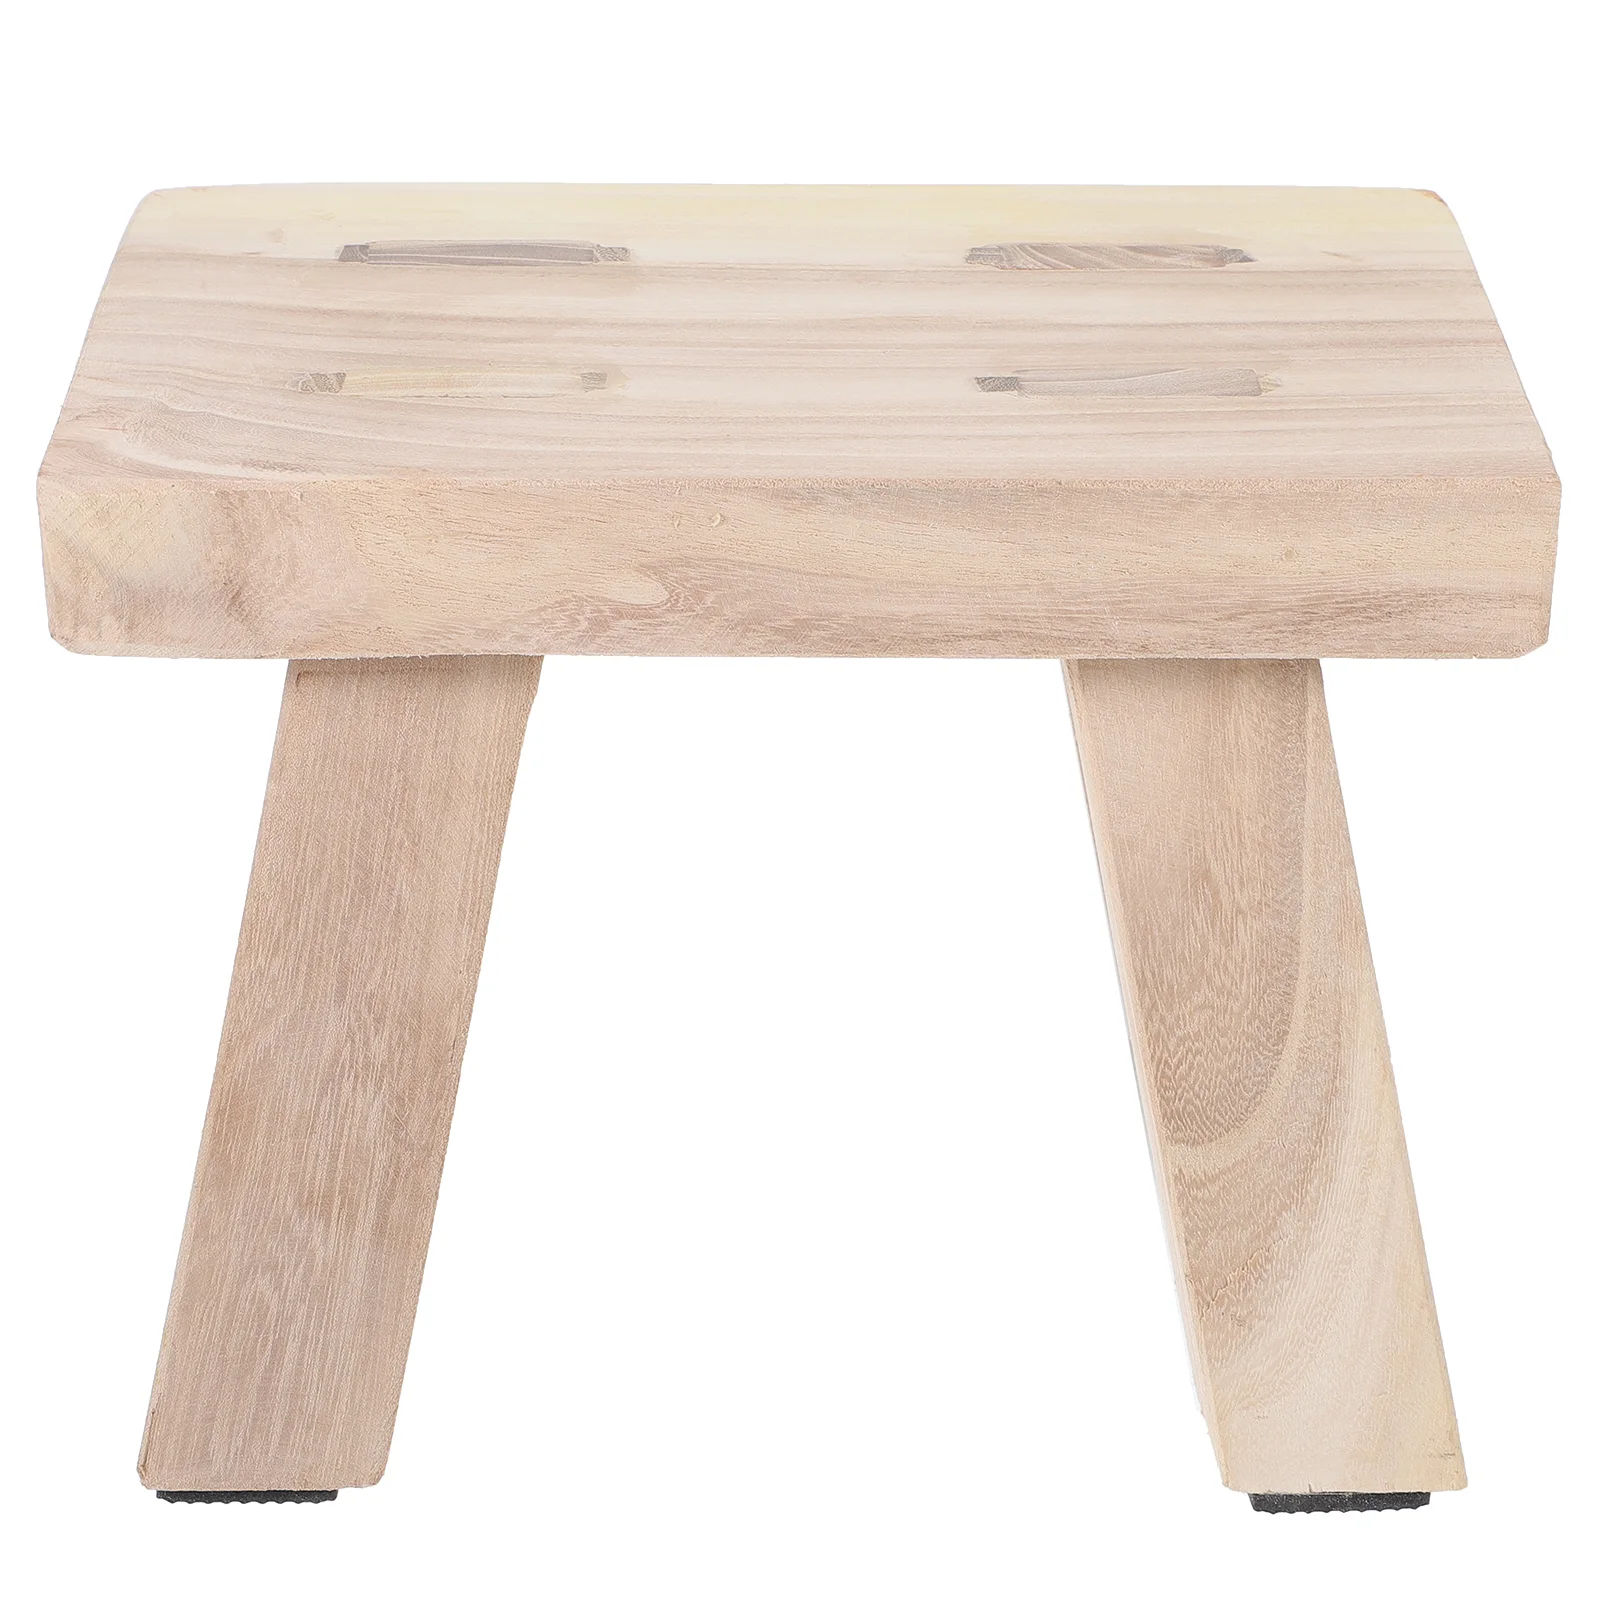 

Solid Wood Bench Step Stool Small Wooden for Adults Footstool Stools Chairs Mini Kids Sitting